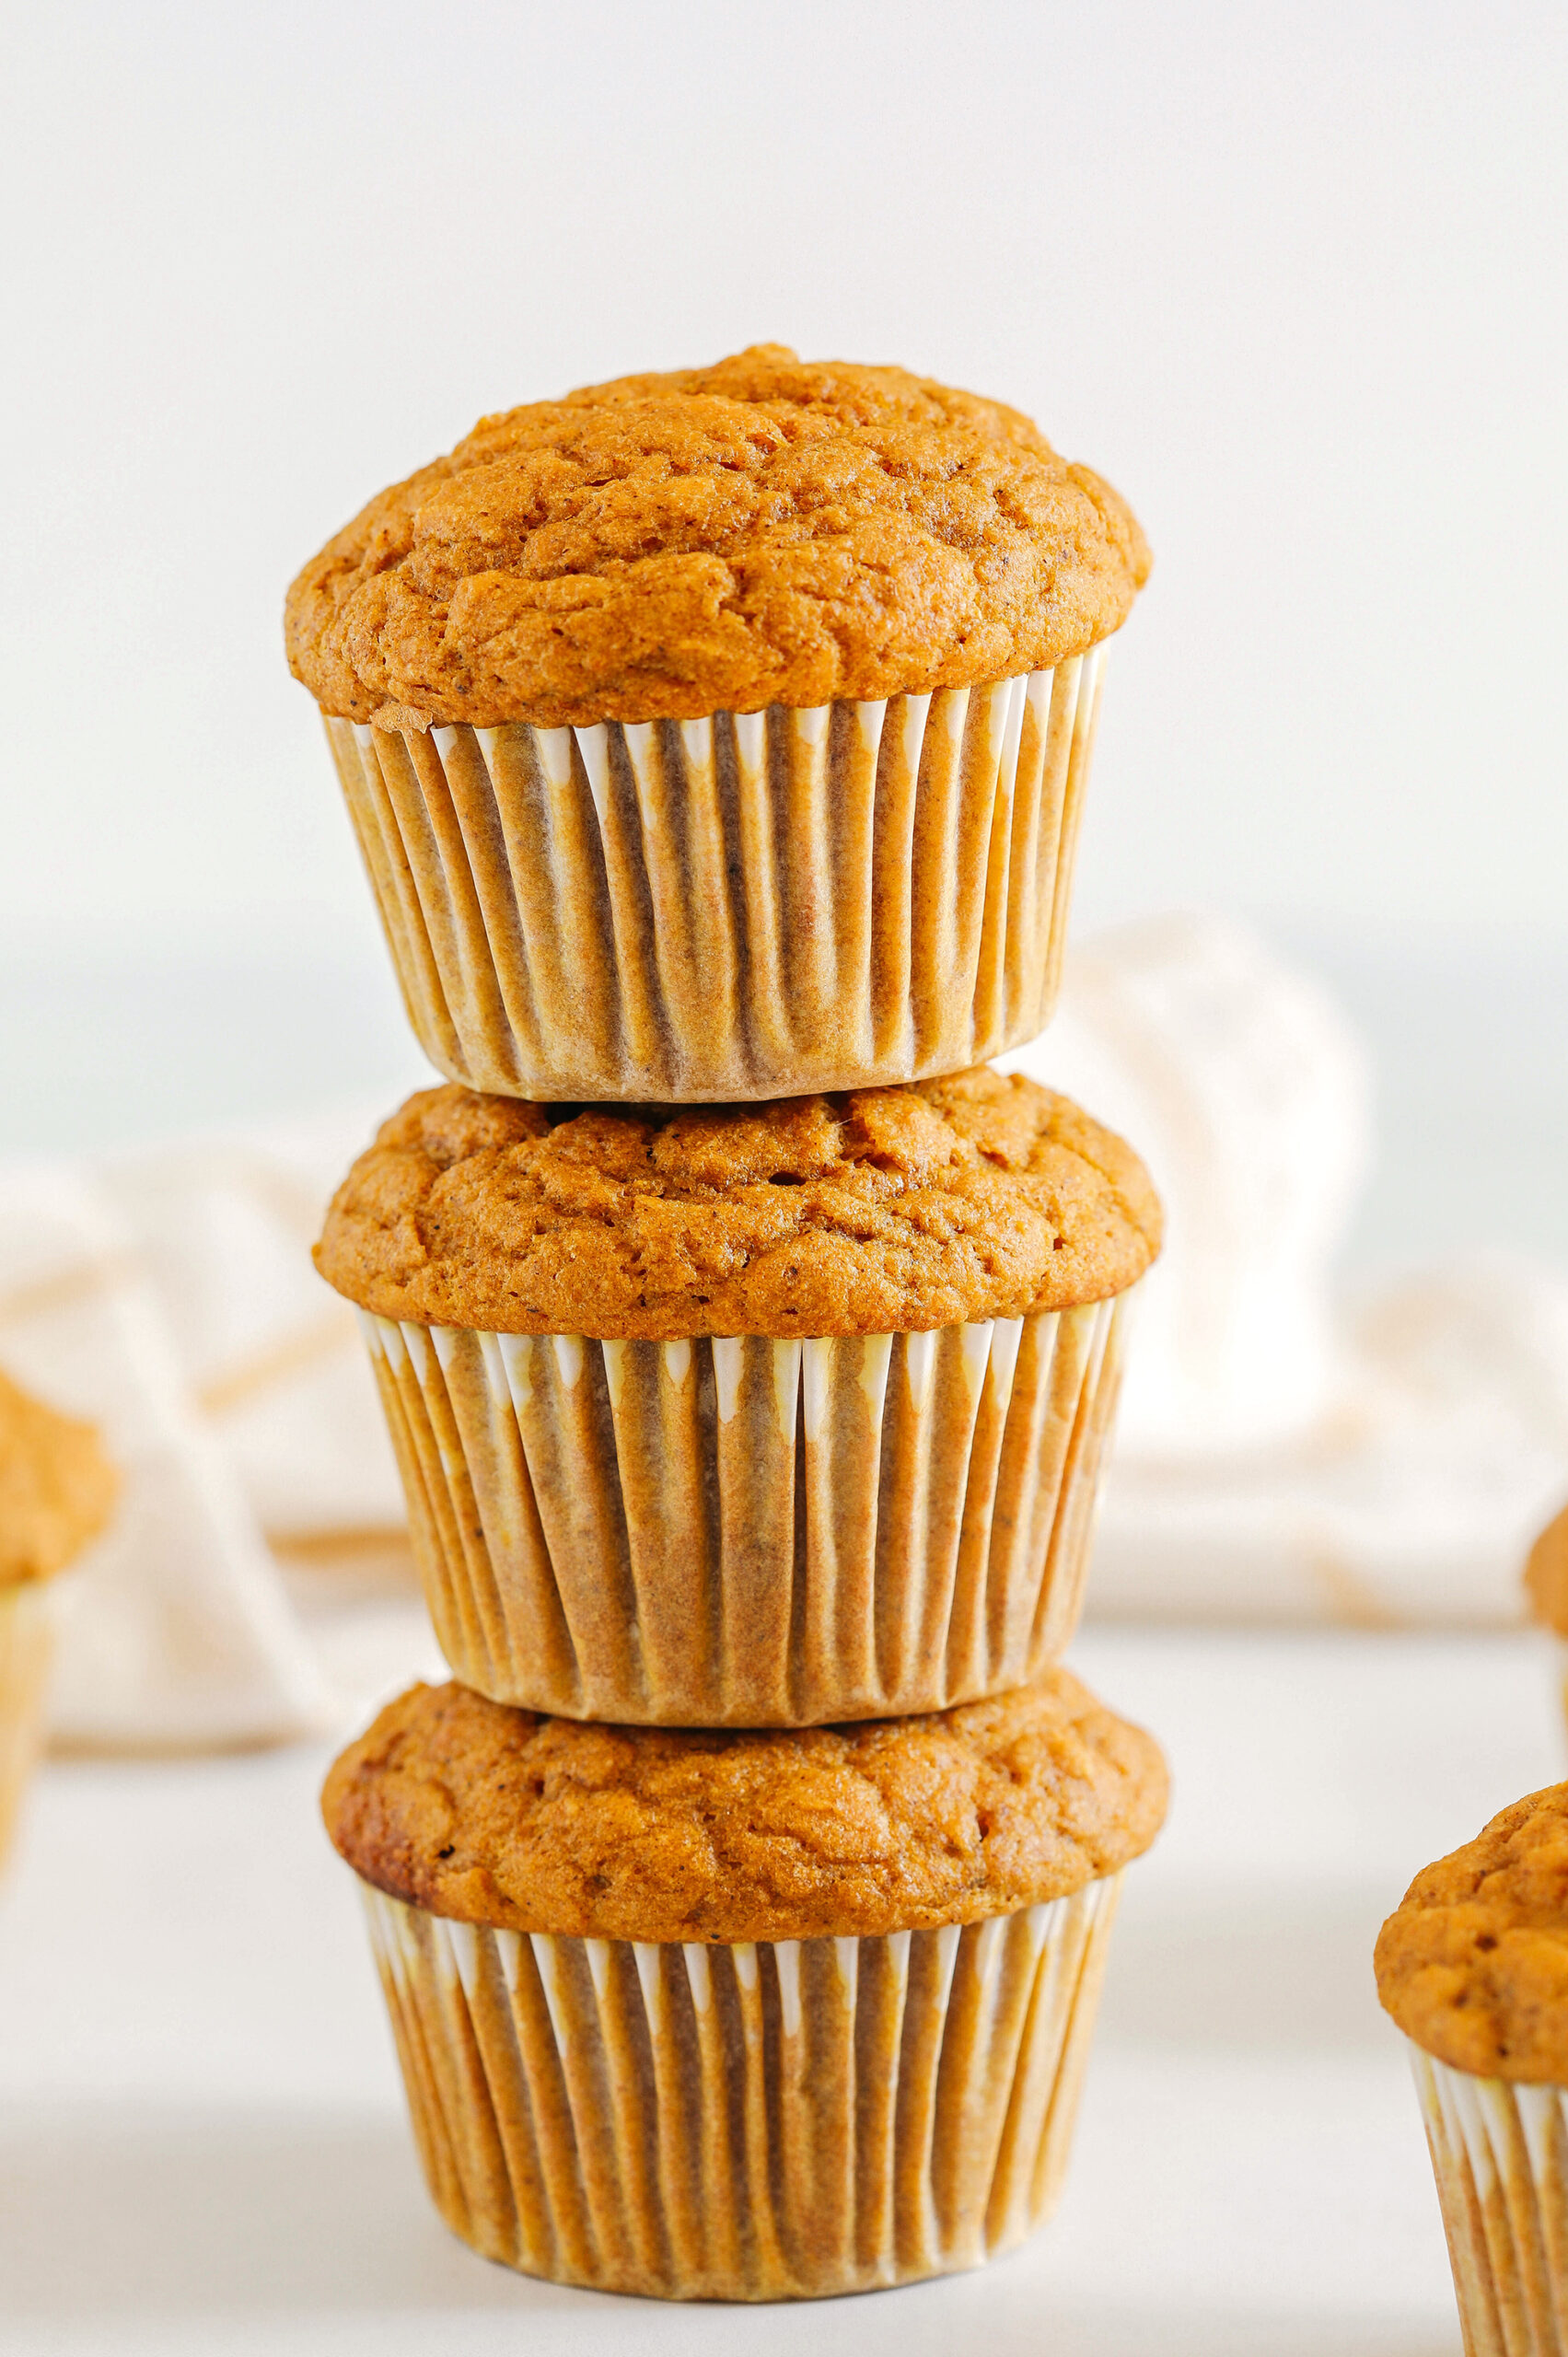 These Whole Wheat Pumpkin Muffins are moist, fluffy, and made healthier with whole wheat flour, Greek yogurt, and zero butter or refined sugar.  Loaded with delicious pumpkin flavor and warm spices for the perfect fall muffin!